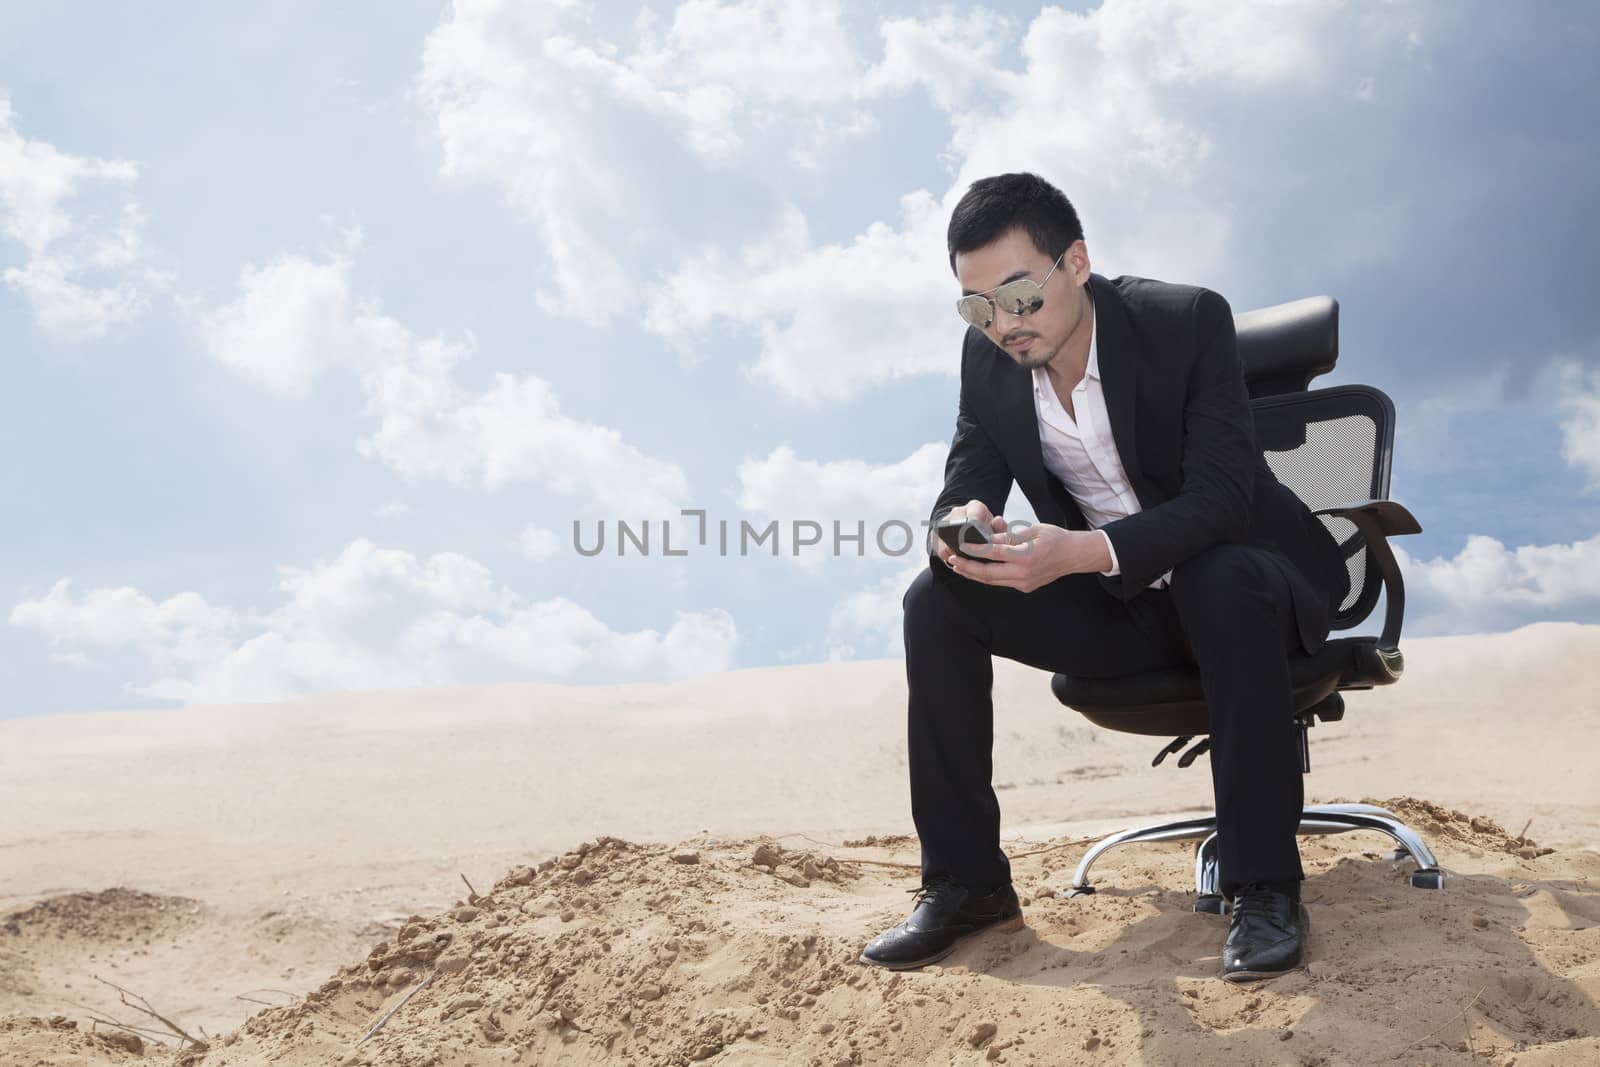 Young businessman in sunglasses sitting in an office chair in the middle of the desert, checking his phone